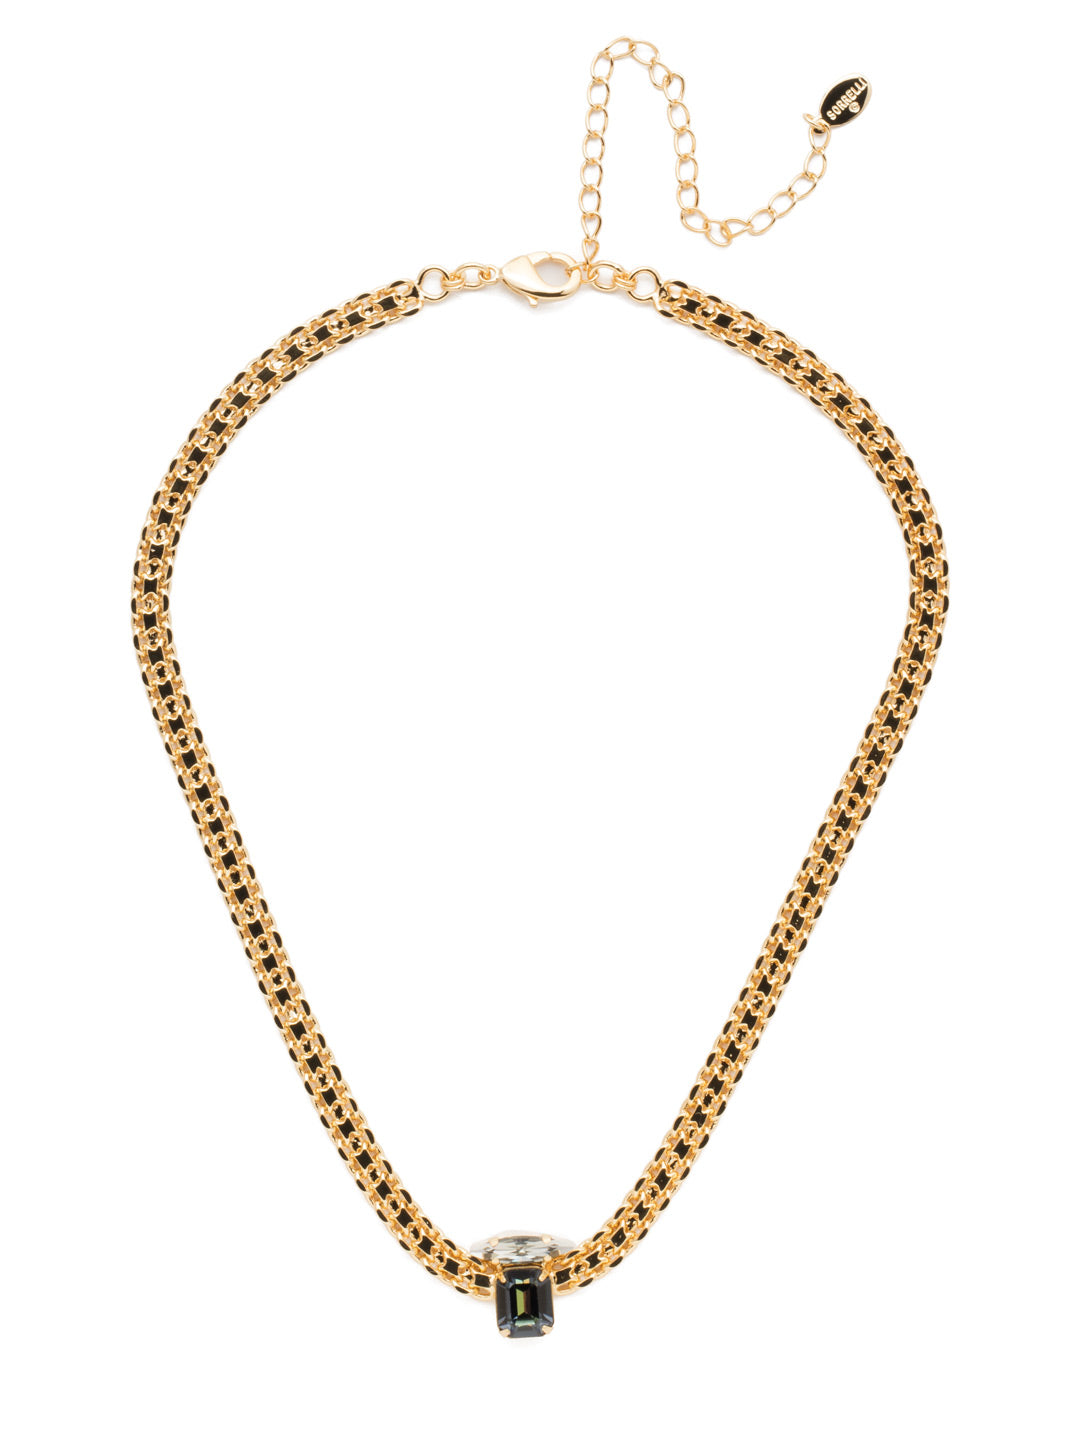 Graycen Tennis Necklace - NEP15BGCSM - Metal rules in the Graycen Tennis Necklace. Layer on thick, dark standout links complemented by a cushion octagon and navette crystal sparkler. From Sorrelli's Cashmere collection in our Bright Gold-tone finish.